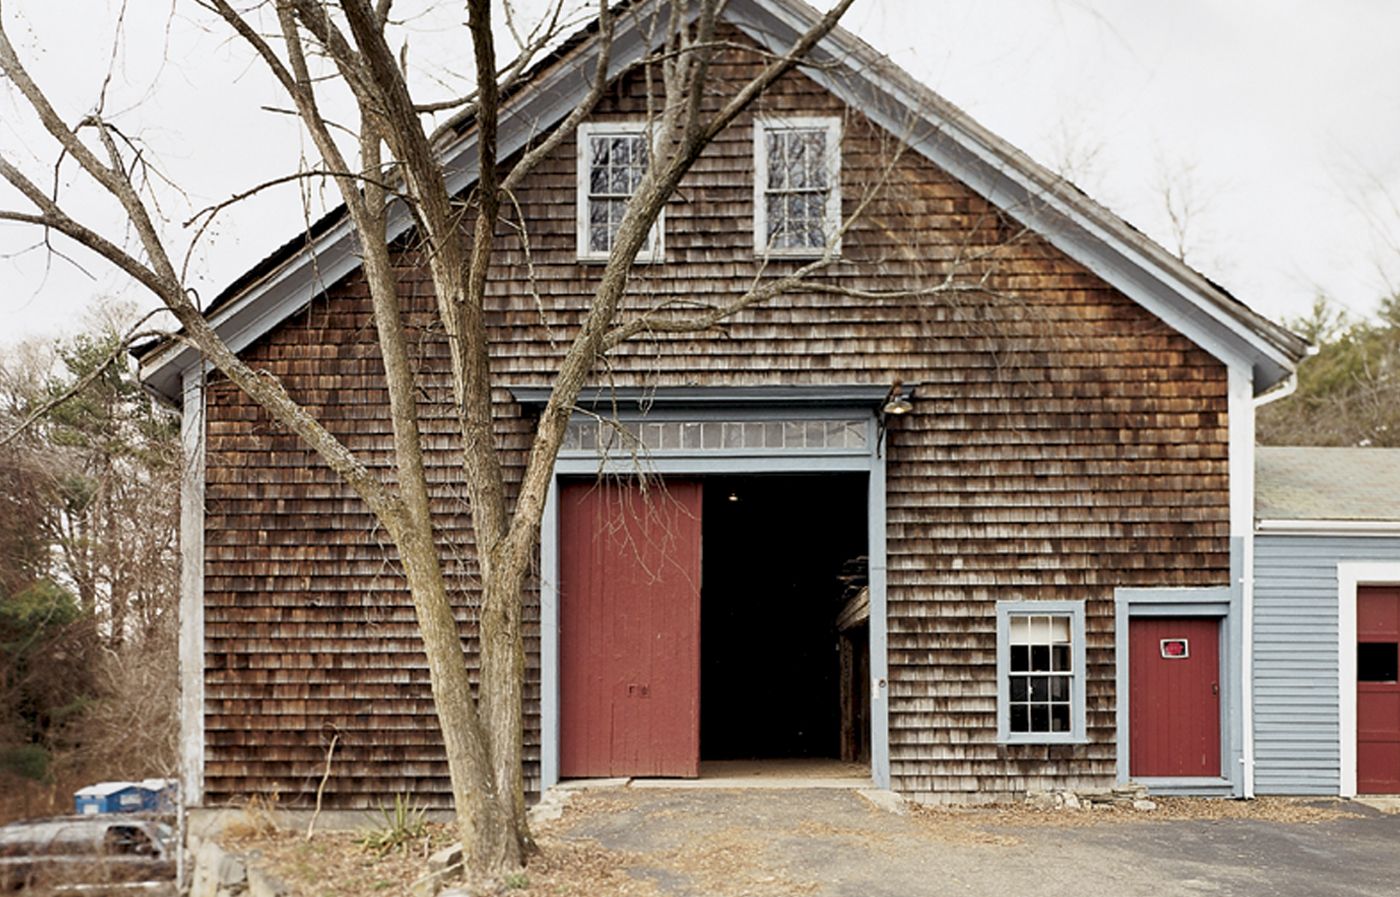 How To Take One Old Barn And Call It Home This Old House